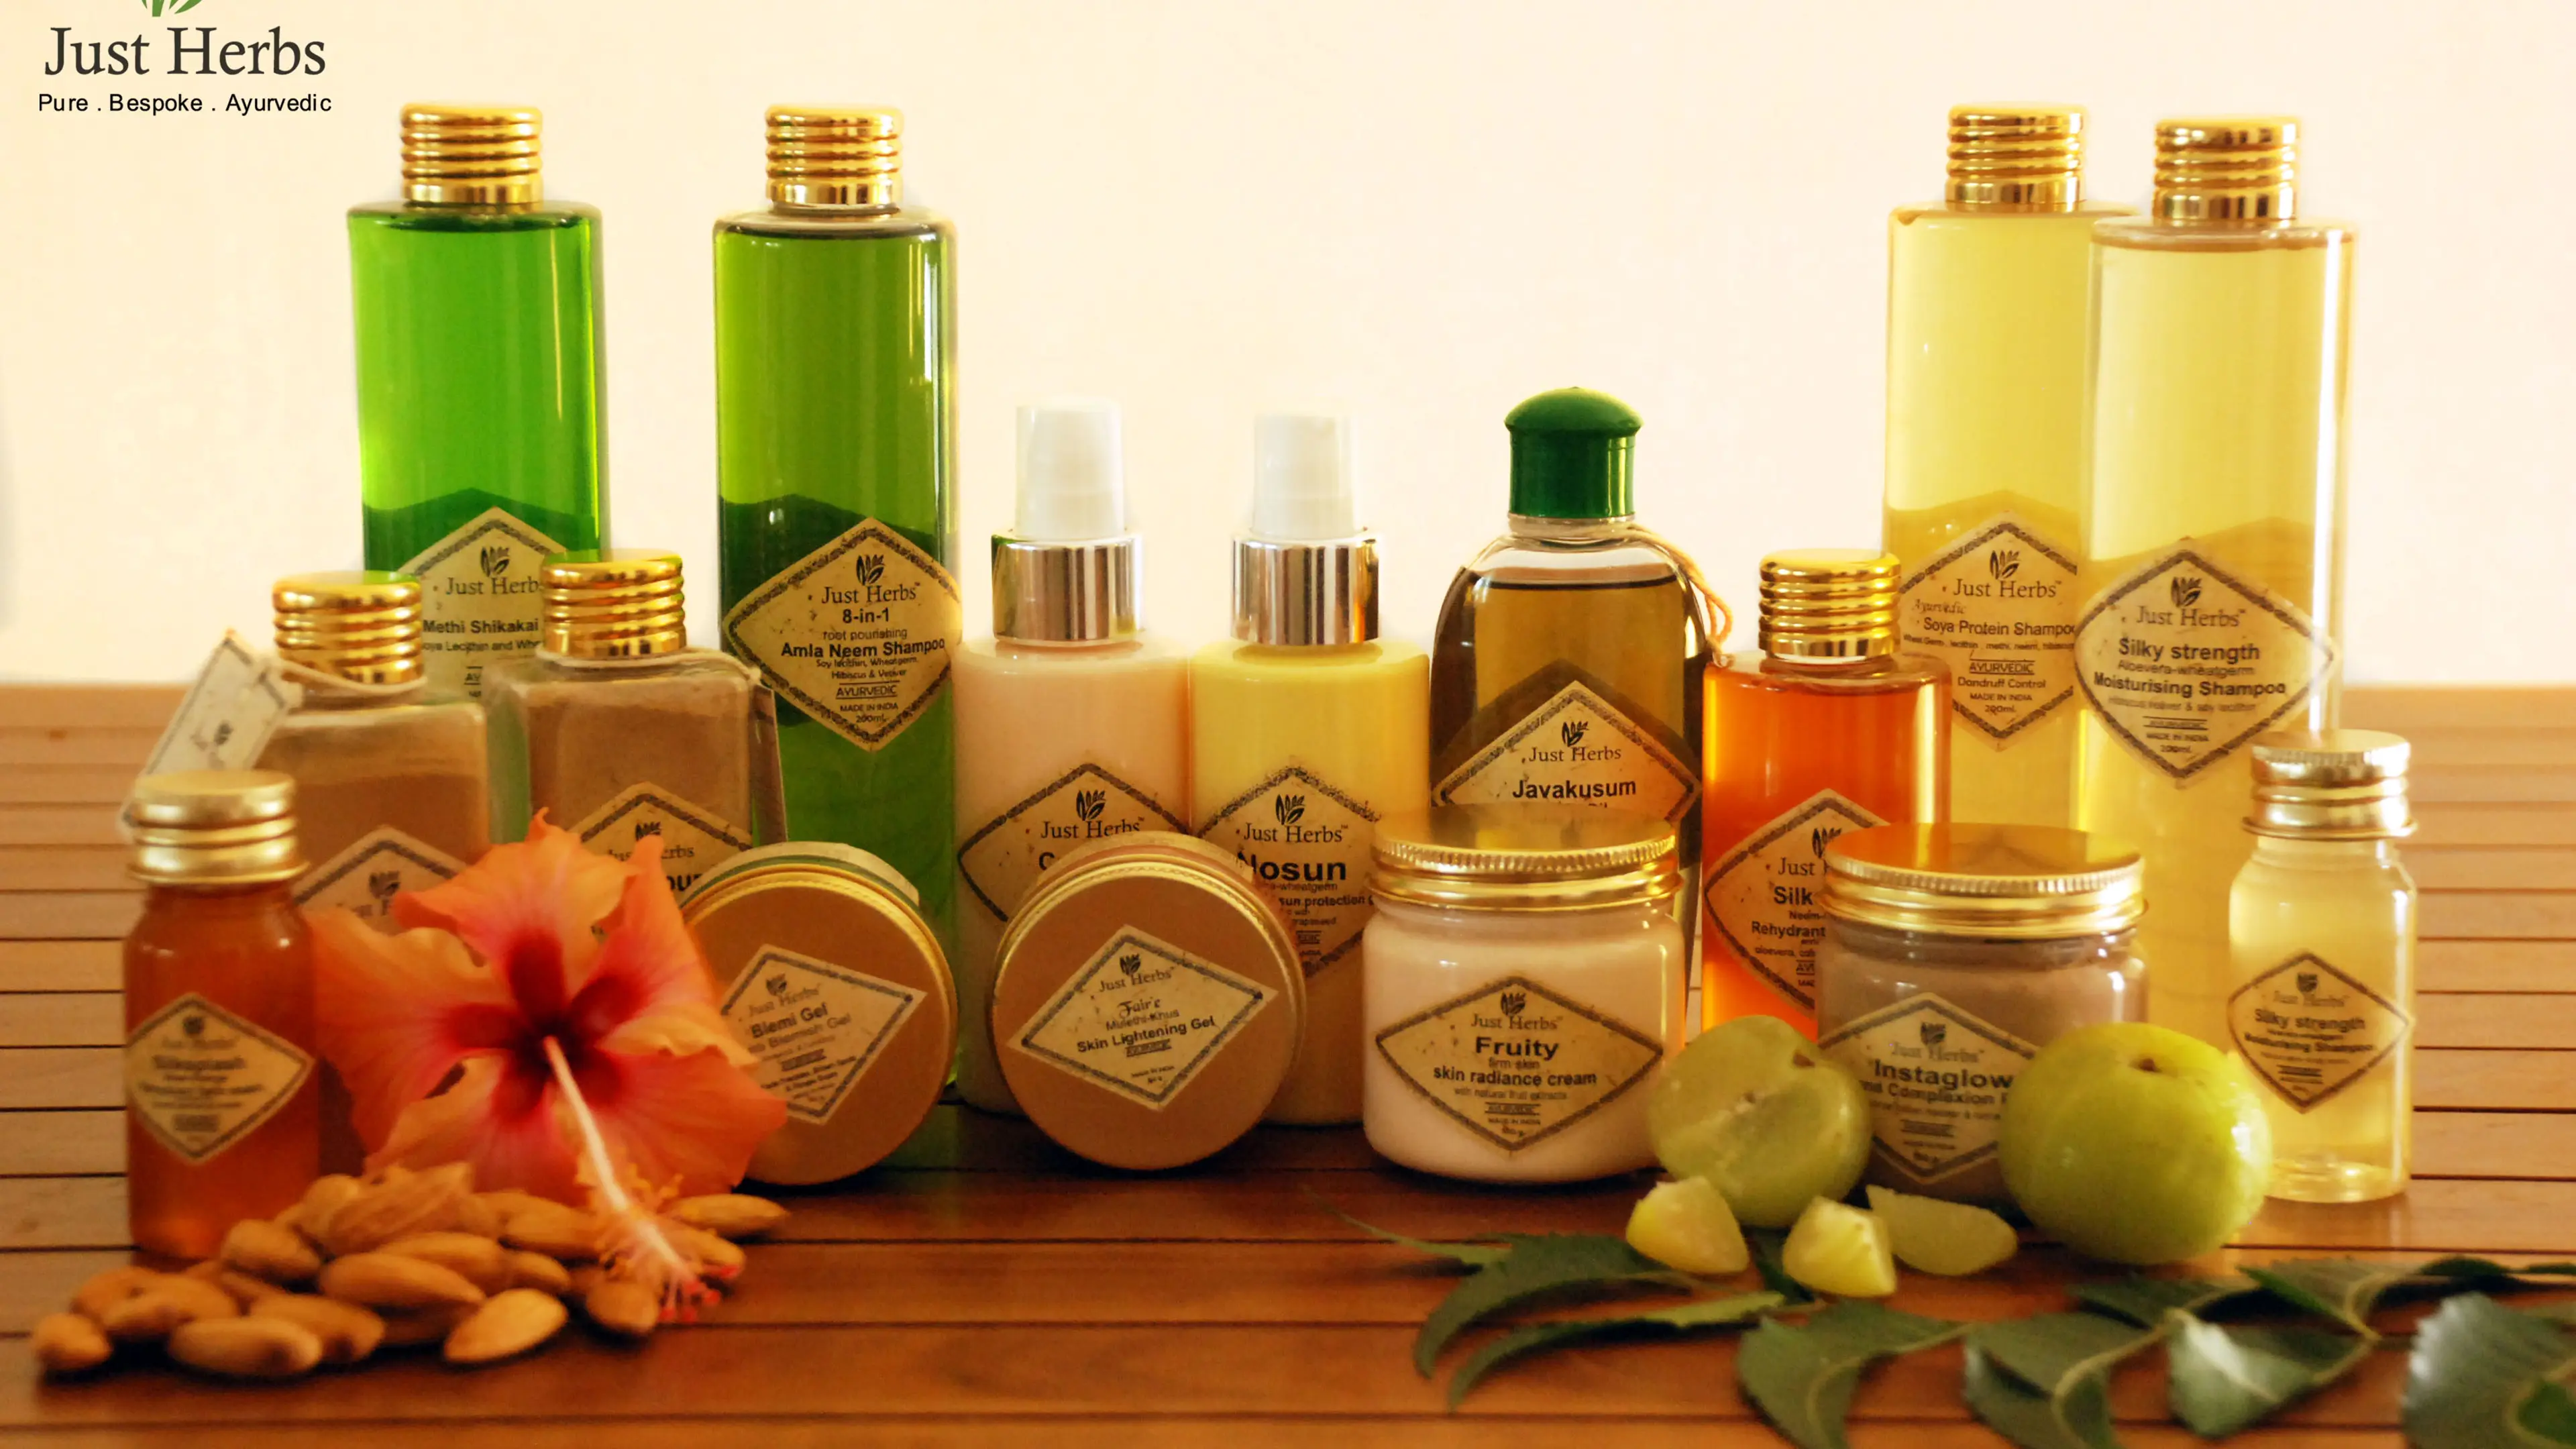 Just Herbs: Dr. Neena Chopra’s entrepreneurial endeavor with organic Ayurvedic beauty and spa products